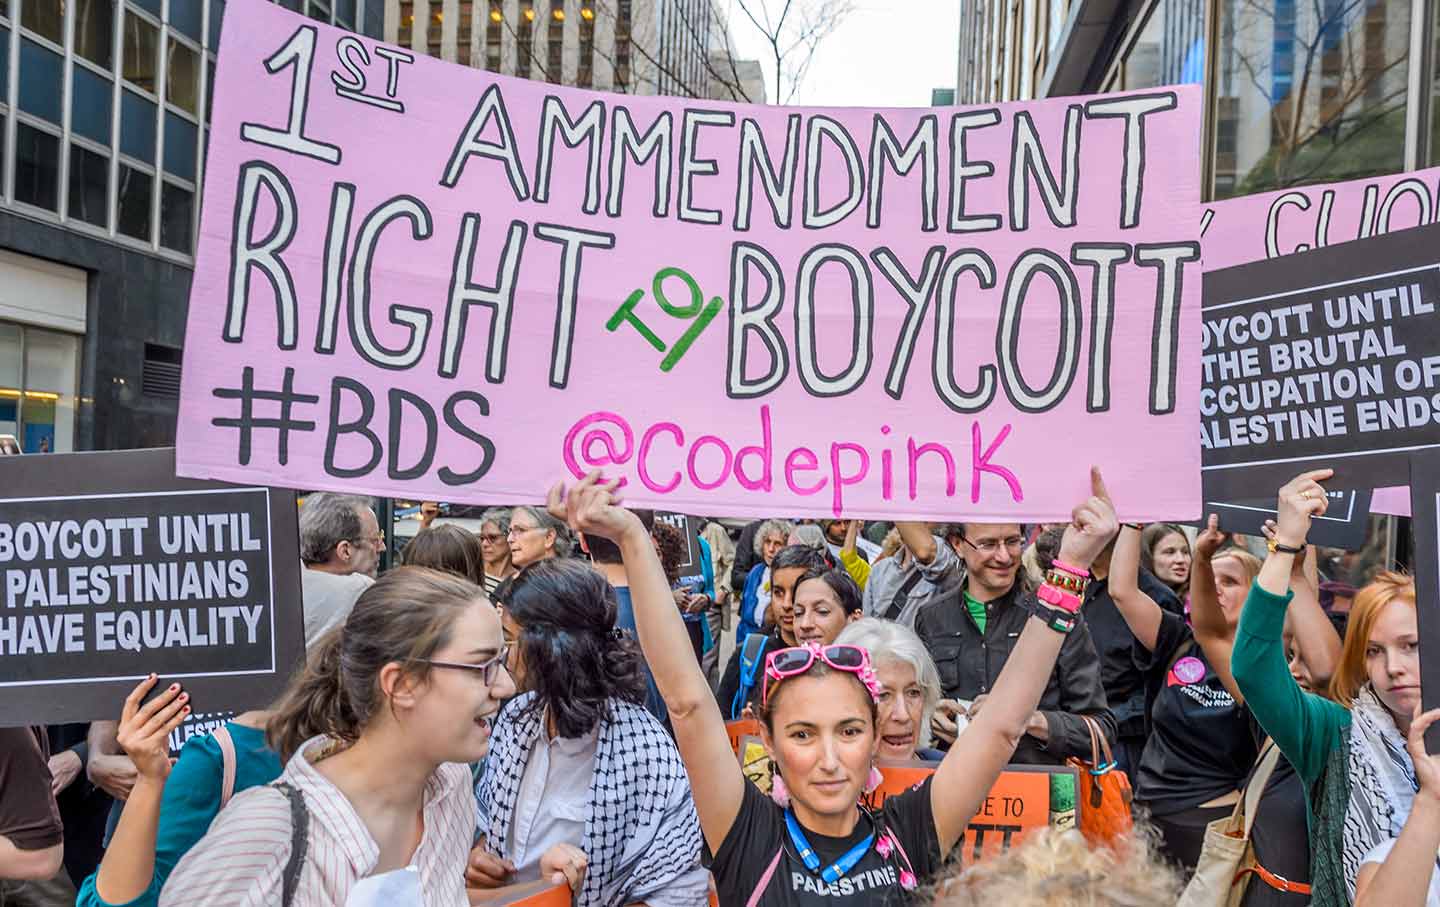 Why Americans Should Support BDS